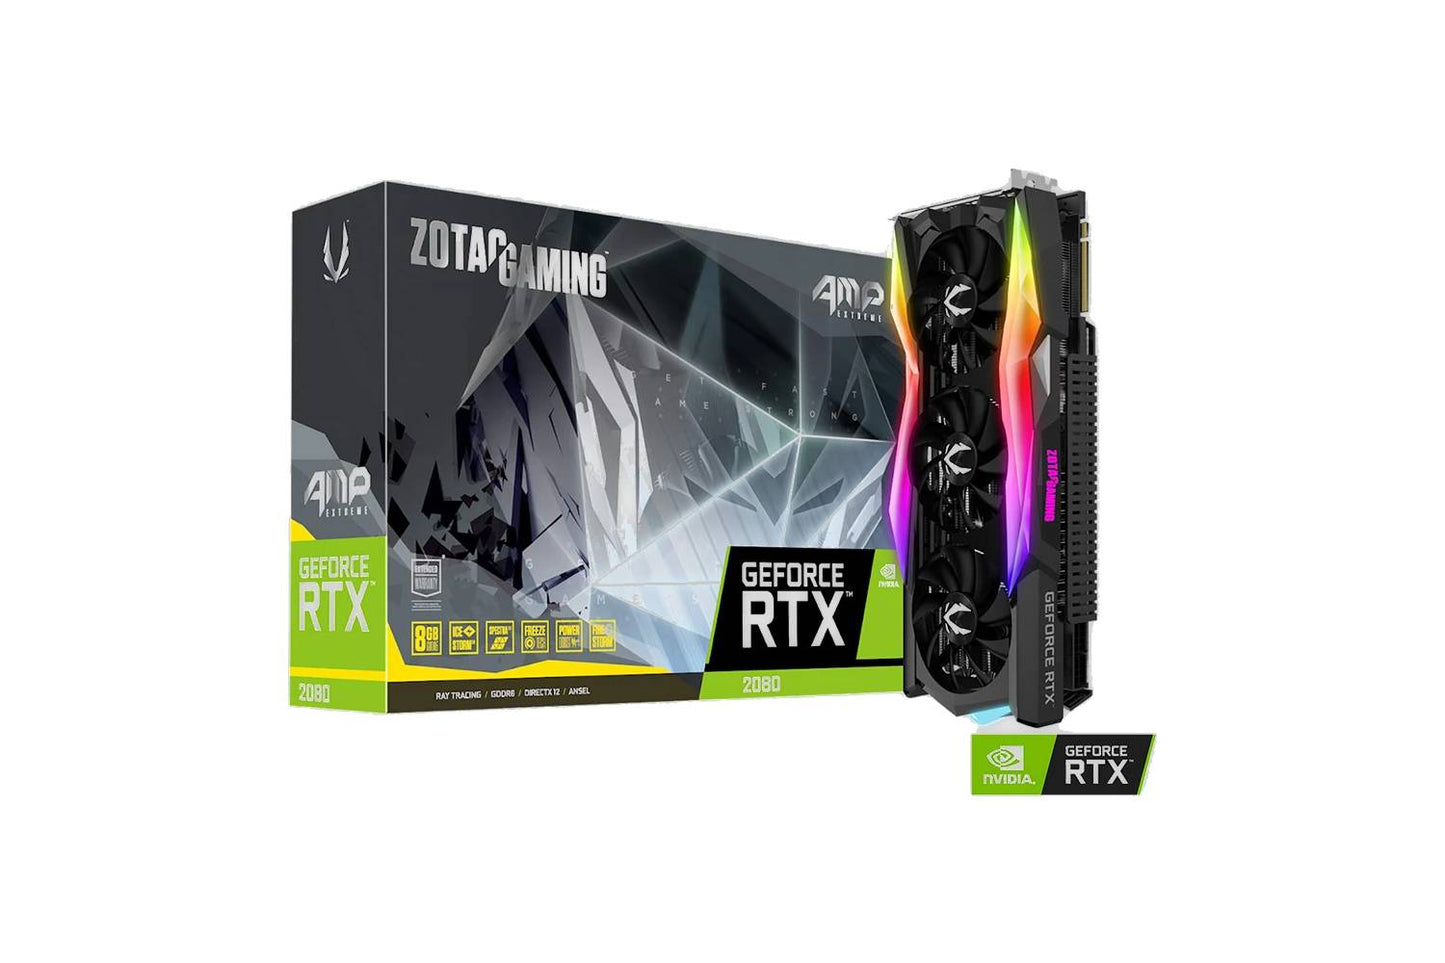 ZOTAC GAMING GeForce RTX 2080 AMP Extreme 8GB Graphics Card